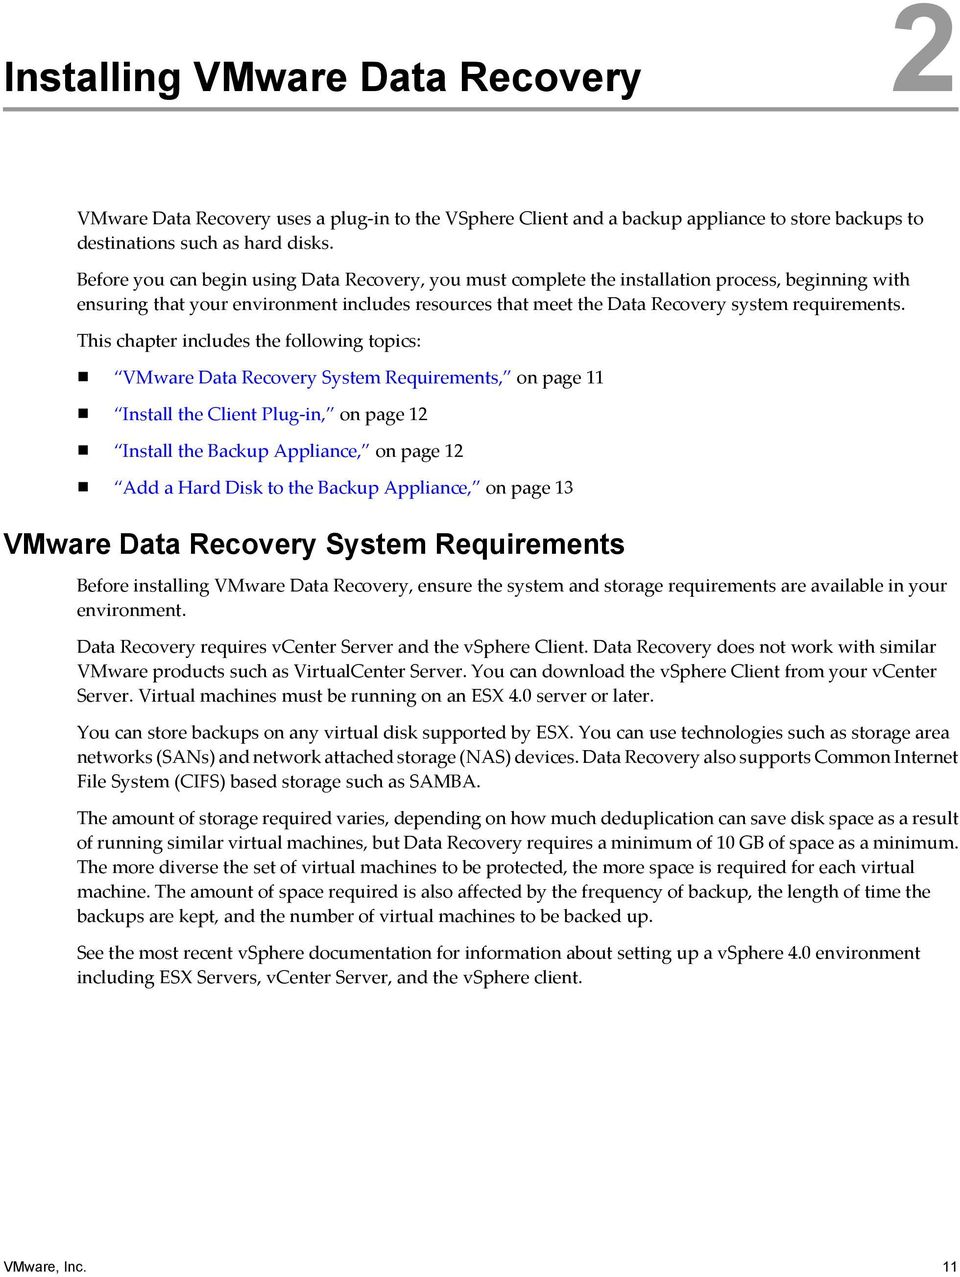 This chapter includes the following topics: VMware Data Recovery System Requirements, on page 11 Install the Client Plug-in, on page 12 Install the Backup Appliance, on page 12 Add a Hard Disk to the